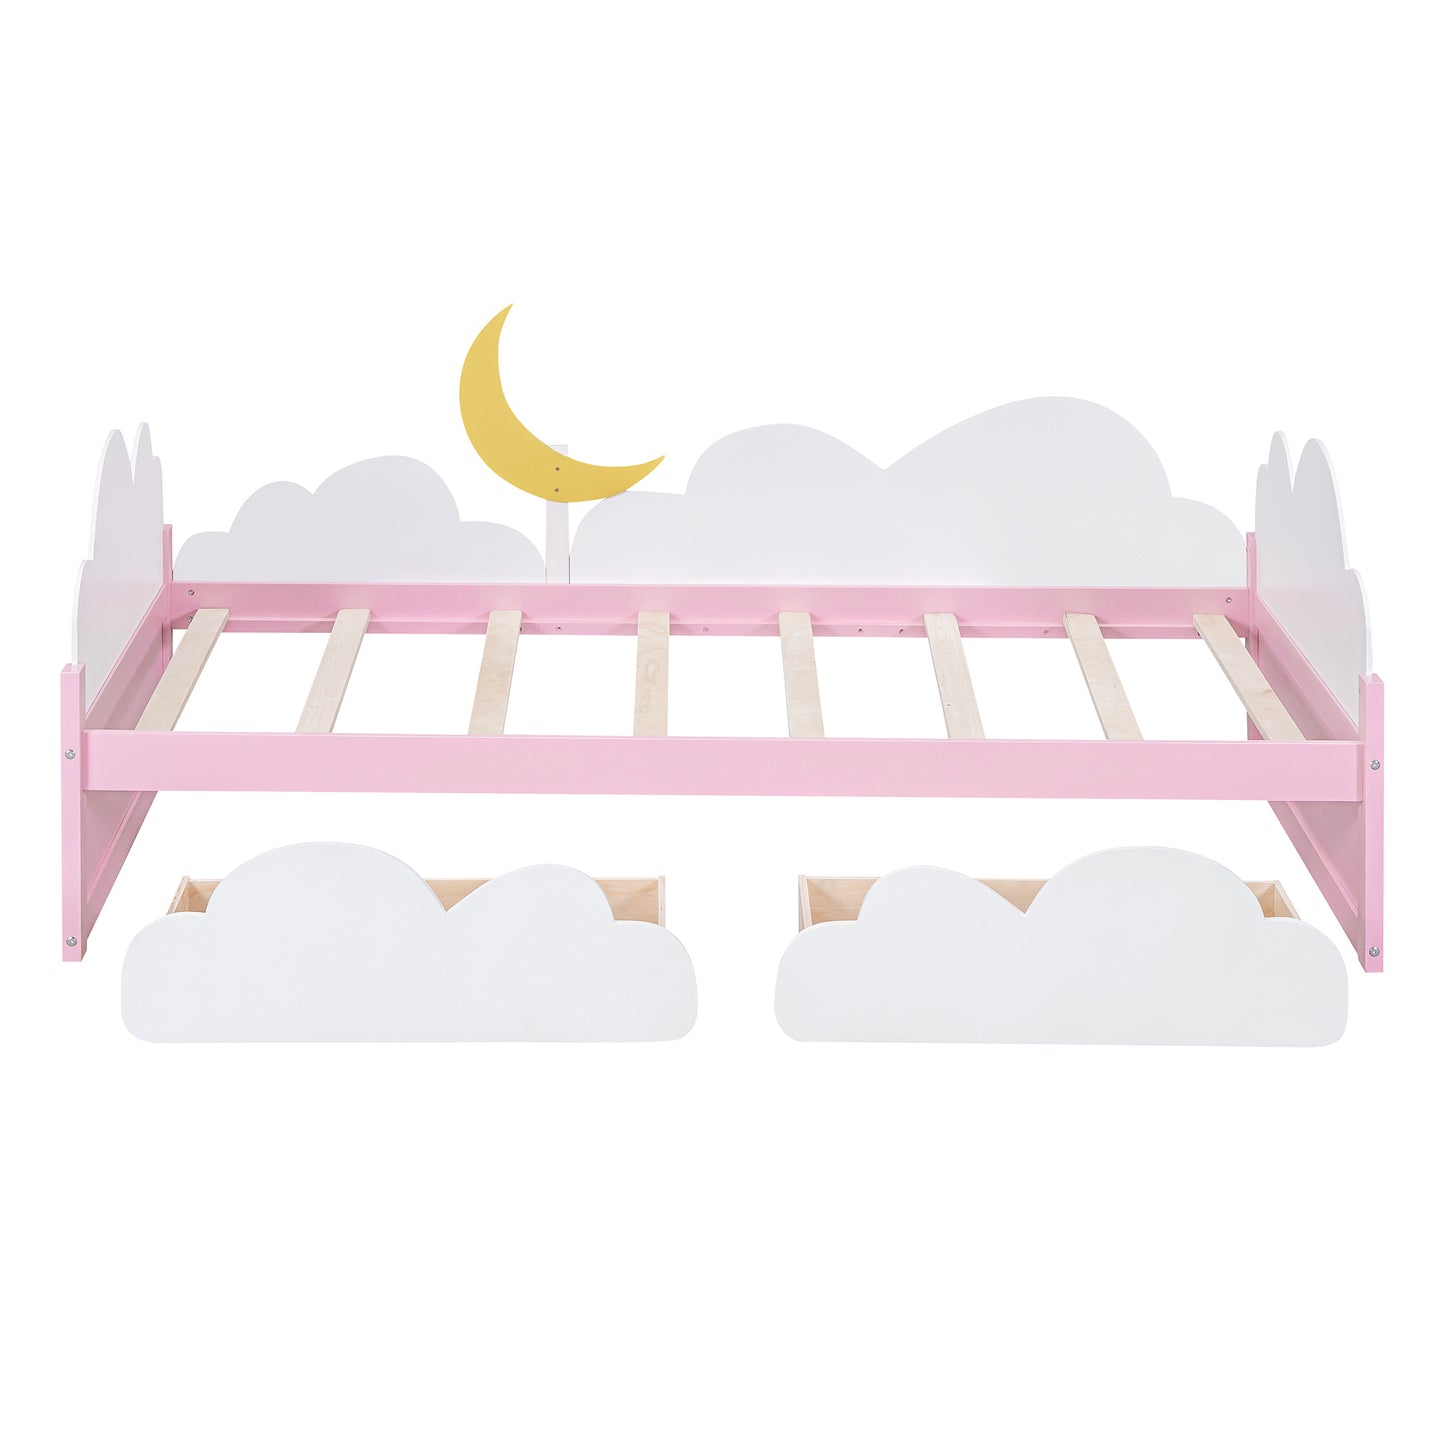 Twin Size Bed with Moon Decor, Platform Bed with 2 Drawers (White+Pink)